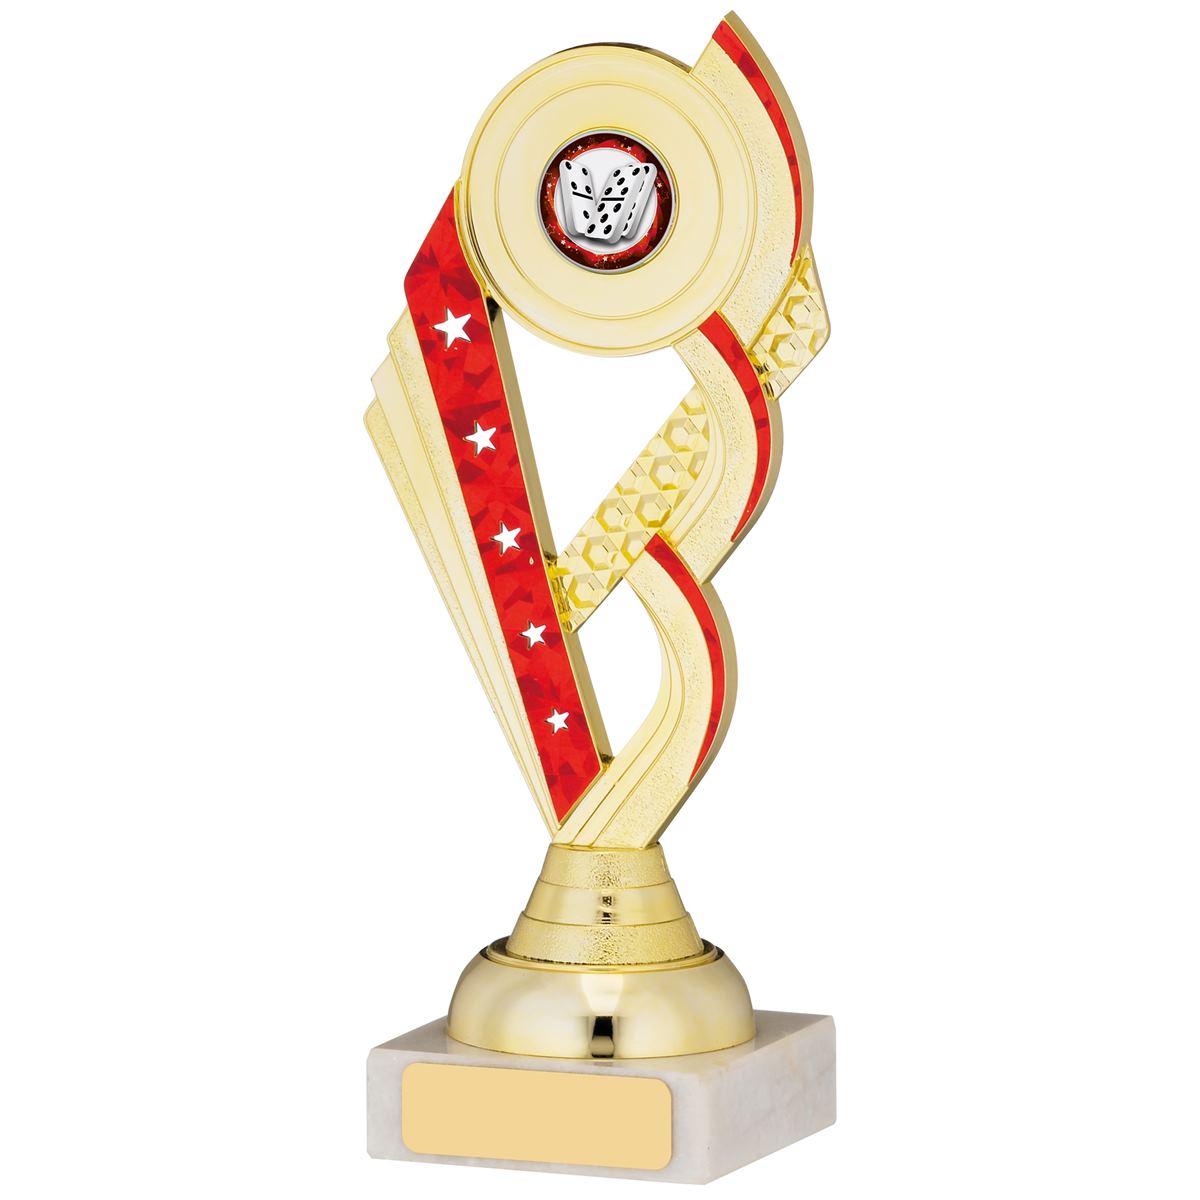 Multi Award Gold and Red Trophy